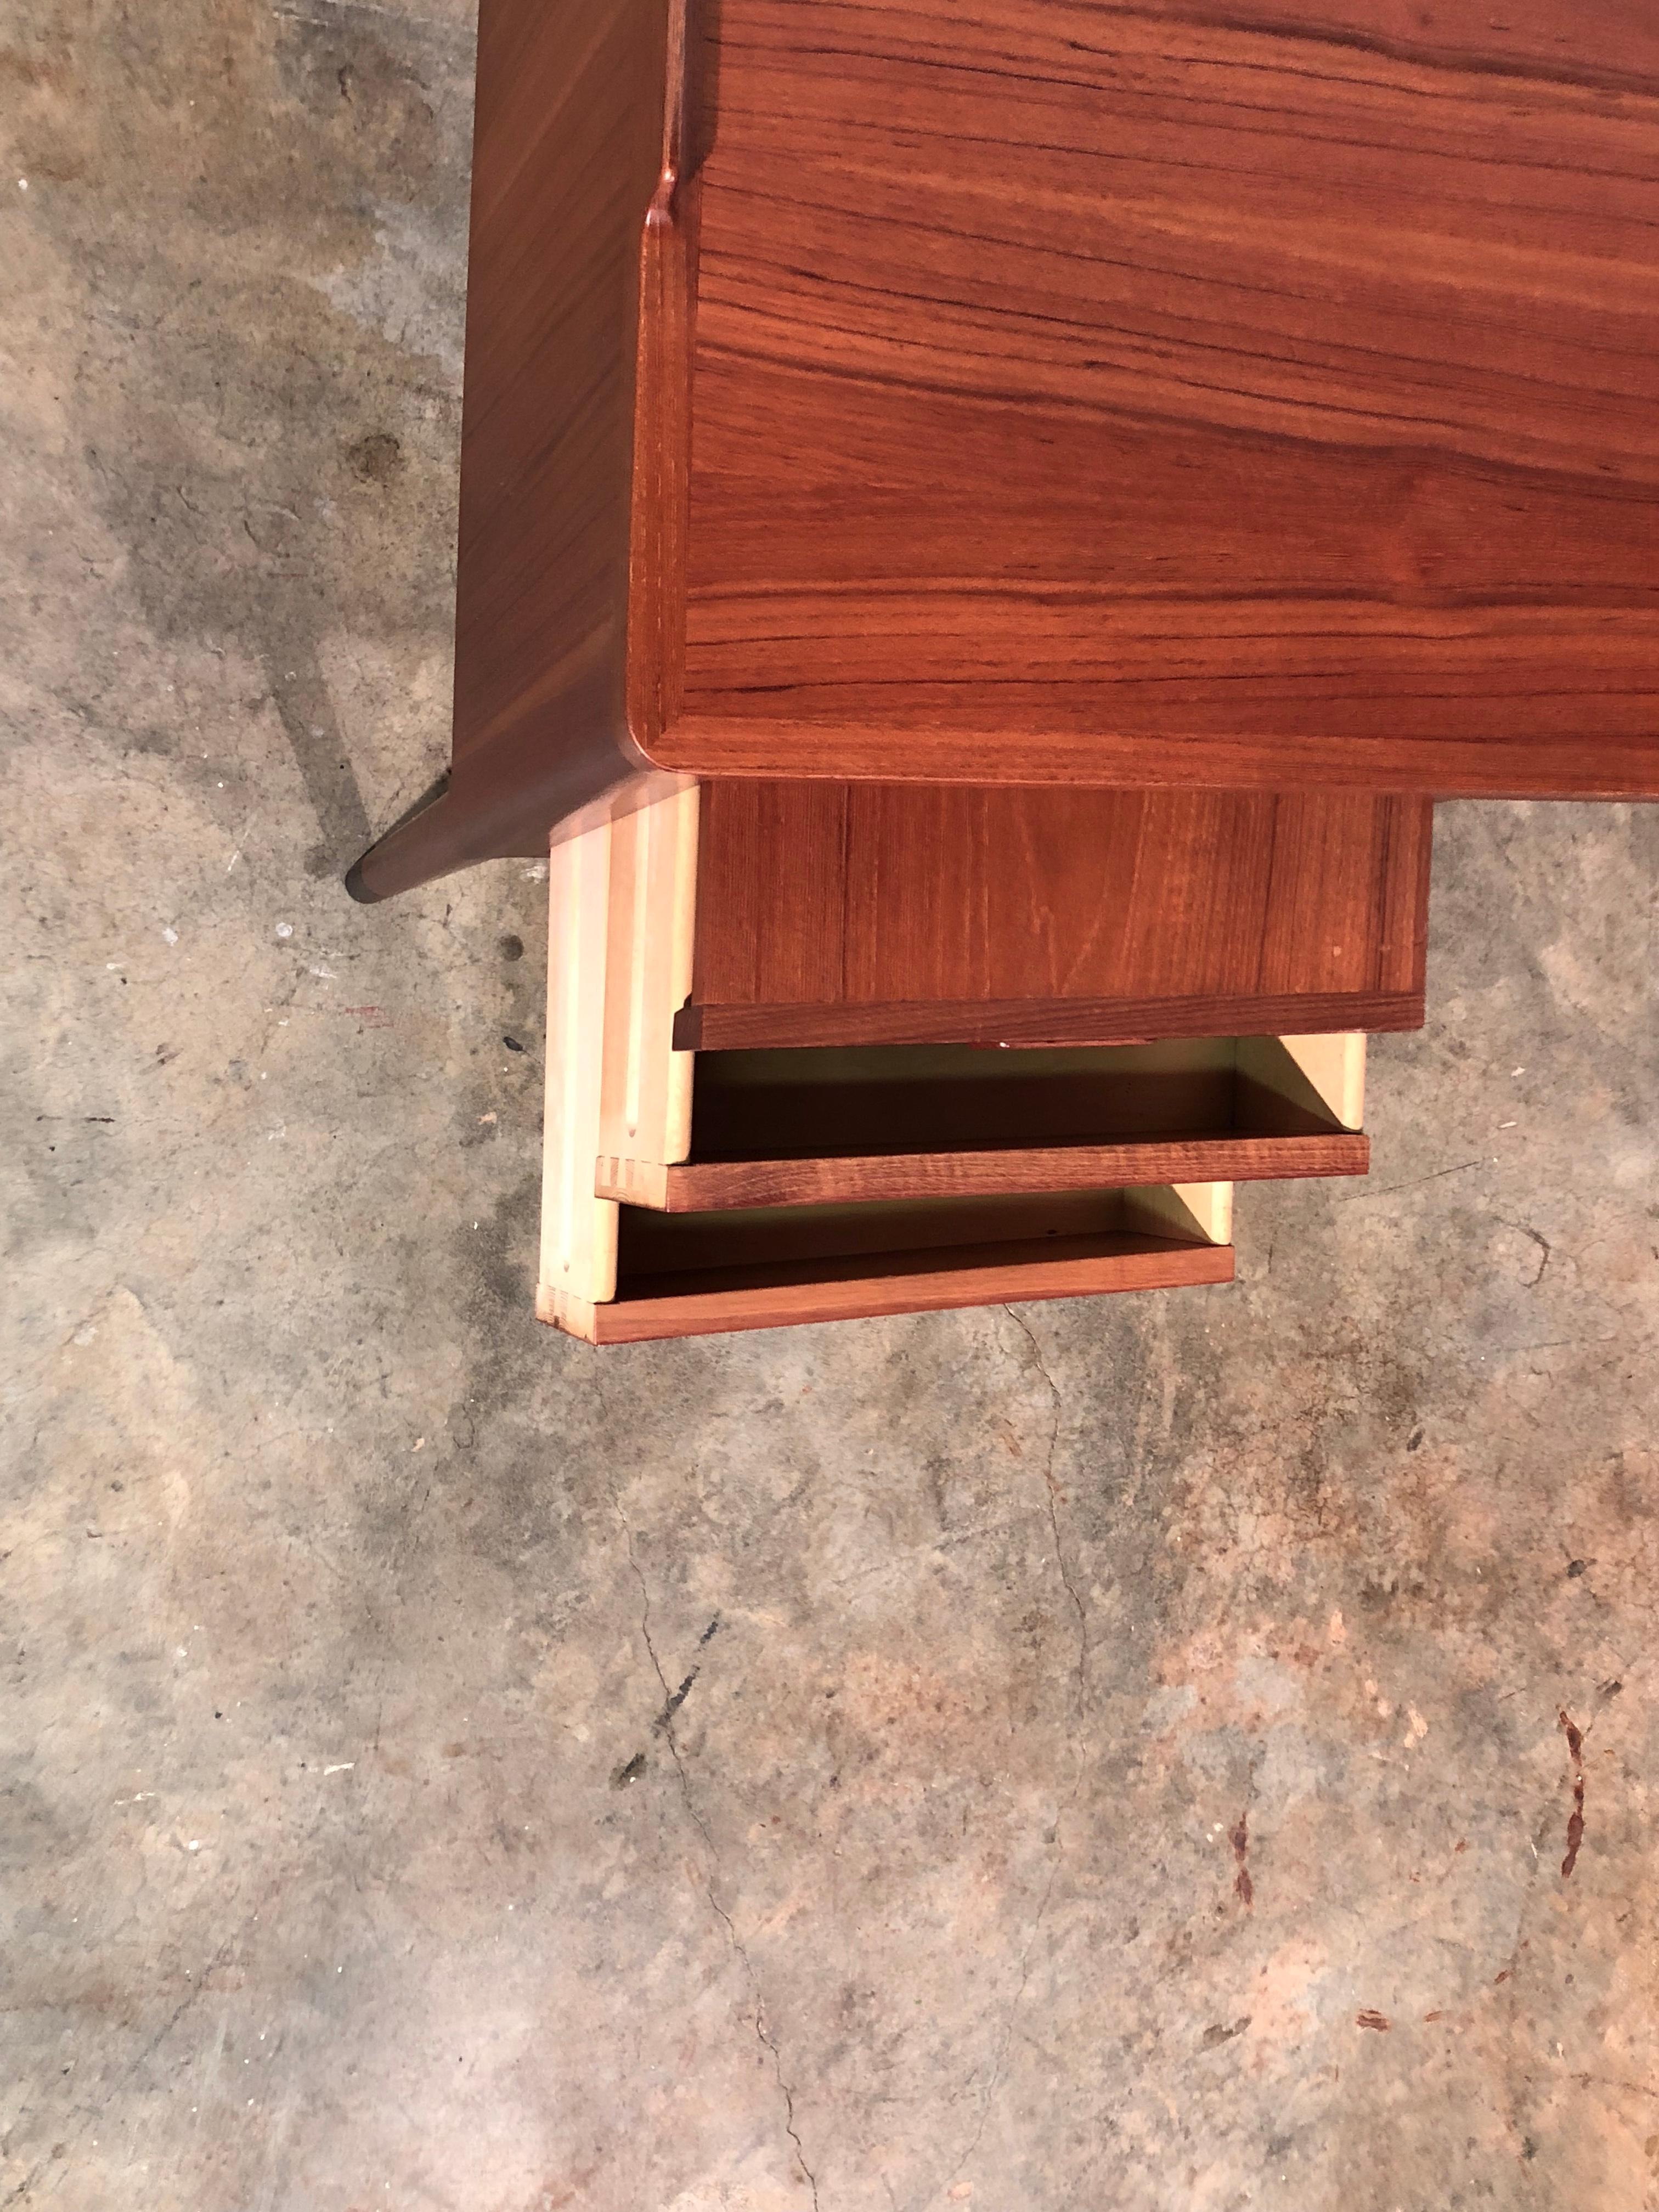 Mid-Century Modern Danish teak slant front desk with built in wine bar. Great Danish design featuring a rotating hideaway wine cubby along with a inset shelf for books or décor. No key for the lock.
No other known issues that would detract from